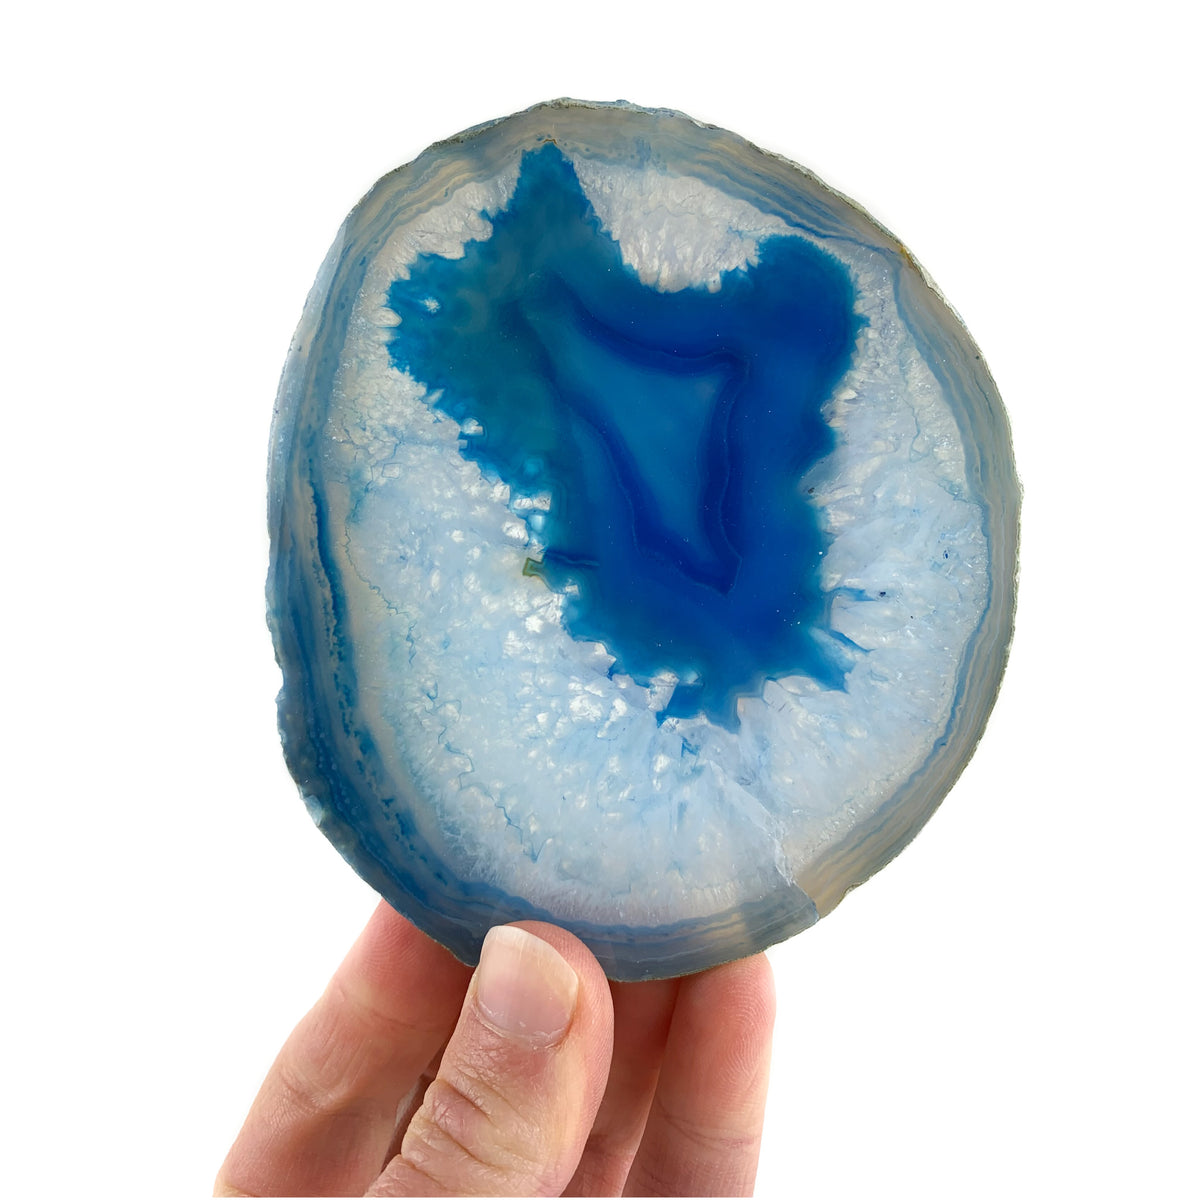 Blue Banded Agate Geode Coasters Set of 4 from Brazil